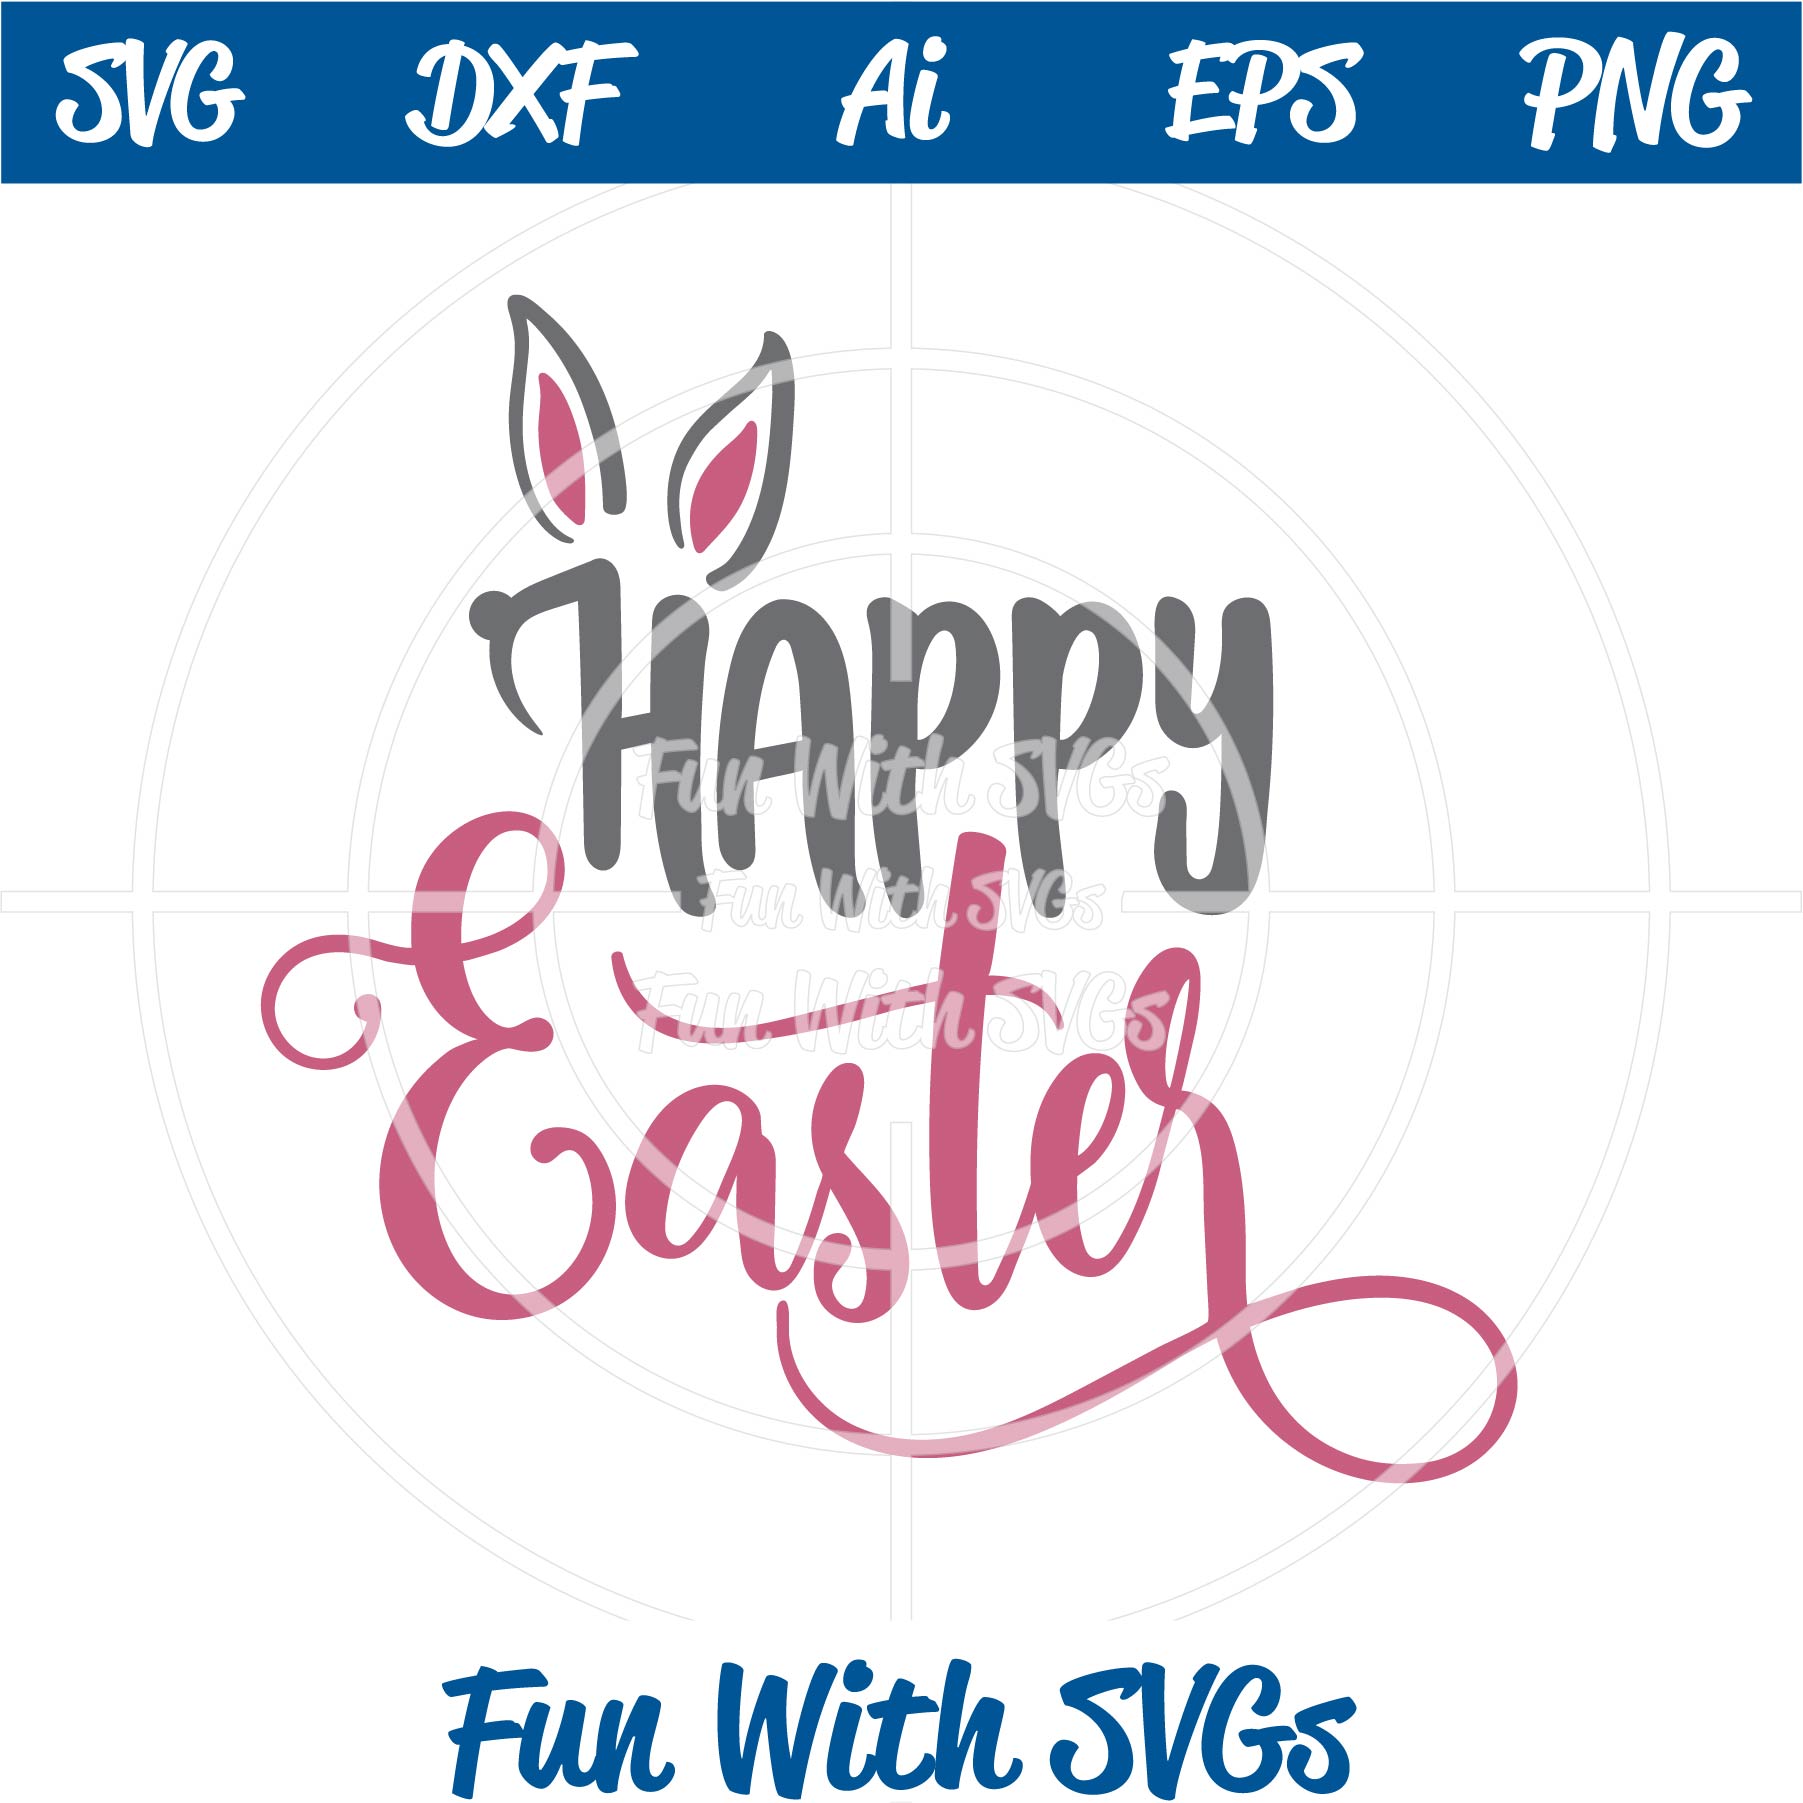 Free Happy Easter Svg : Free Happy Easter Monogram SVG Cut File